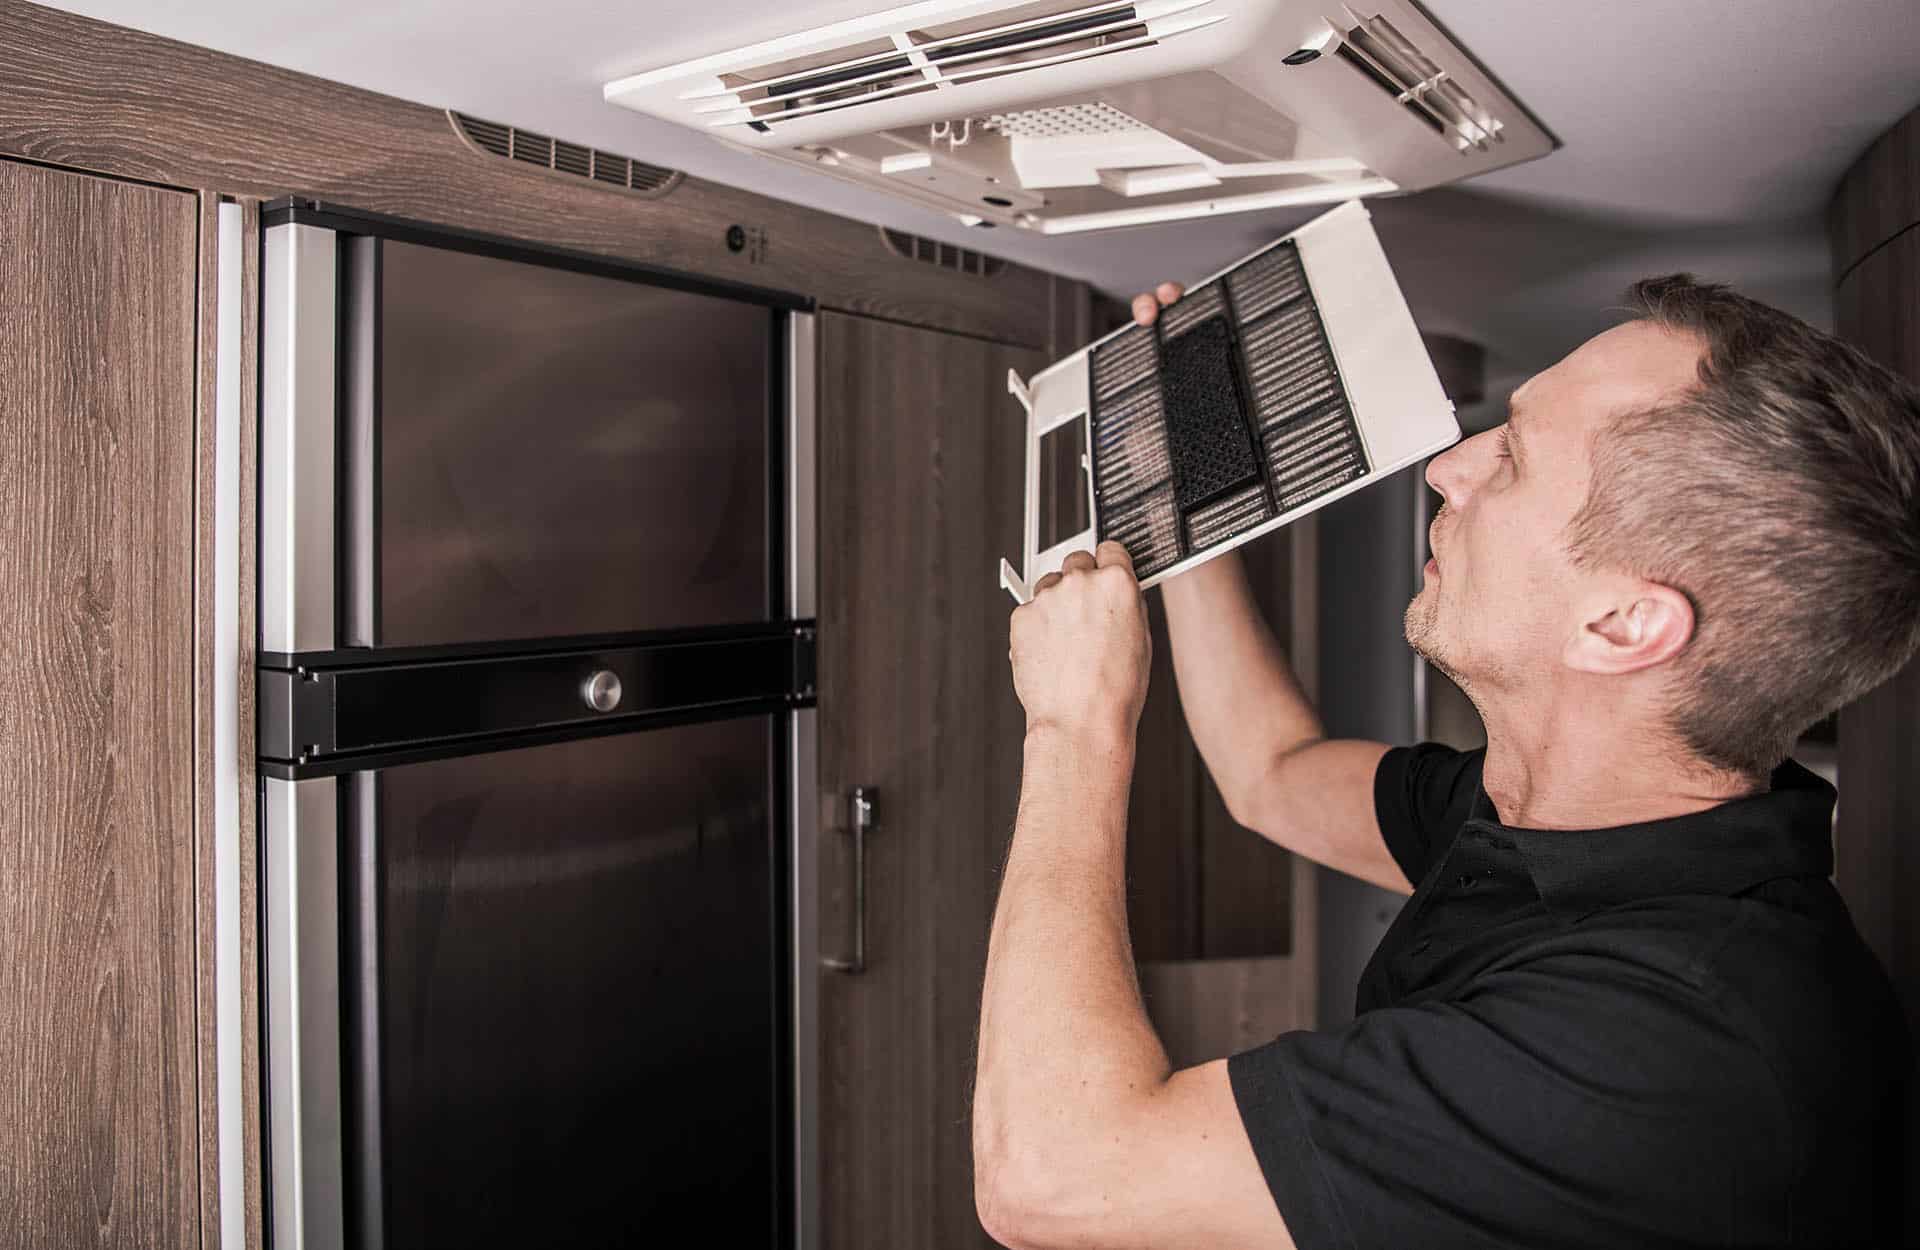 Best Practices For Commercial Kitchen Air Filter Cleaning and Maintenance